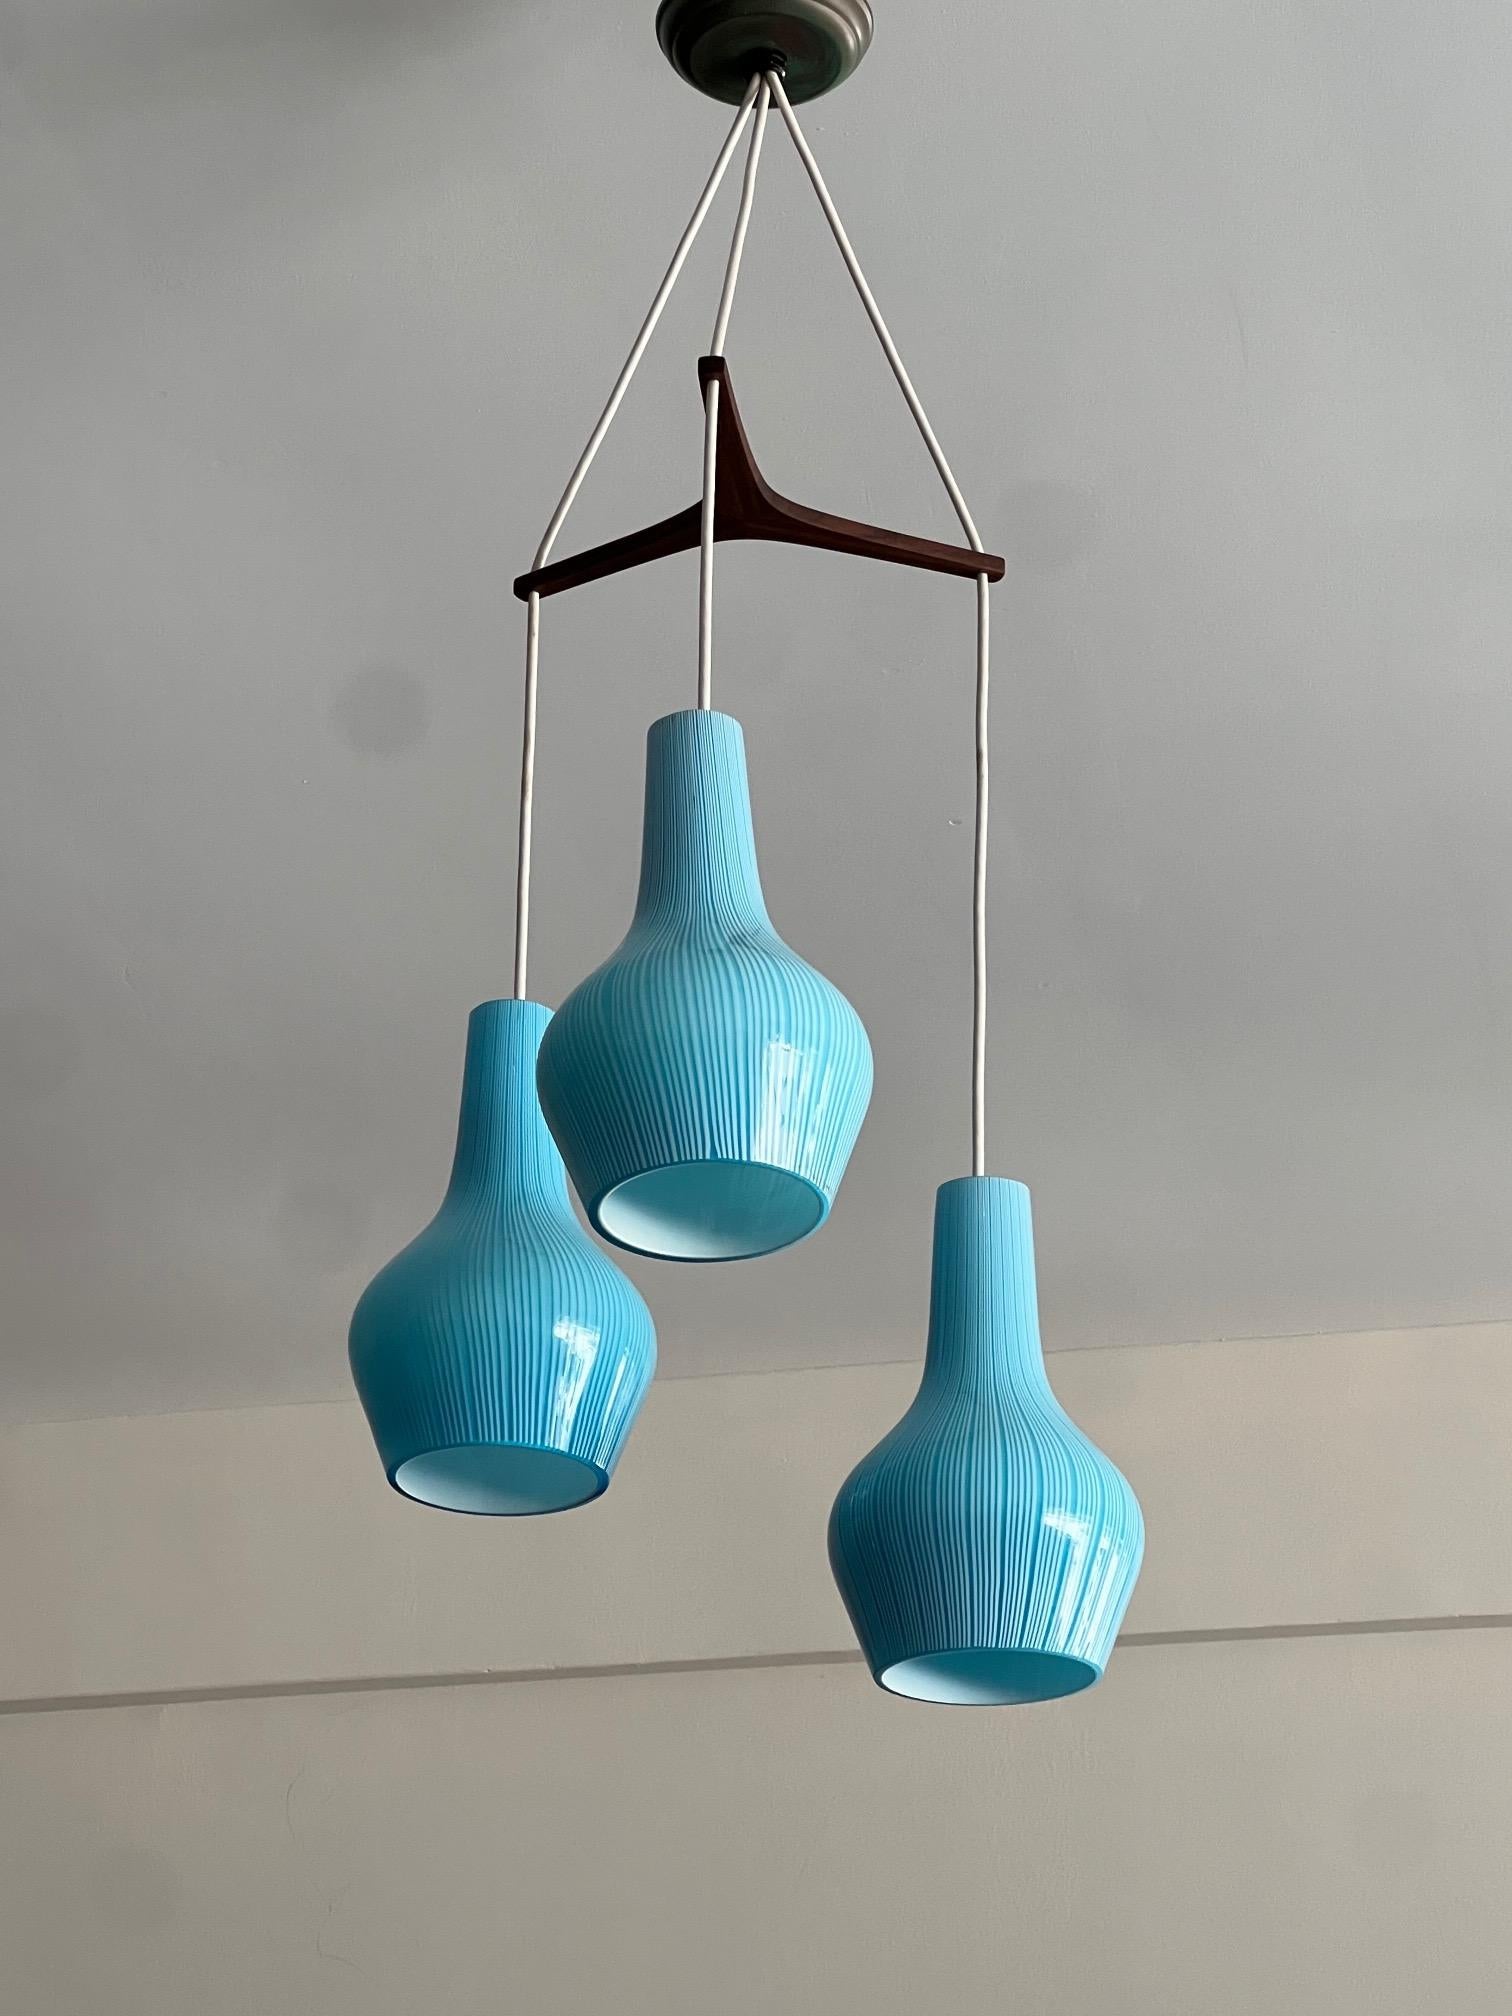 A beautiful blue, cased glass, onion shaped shades-M.Vignelli for Venini, Italy, 1950's, chandelier. Three shades, stripes, slight differences, teak tripod shaped mount, canopy replaced. The height of the pendants can be adjusted depending on need,